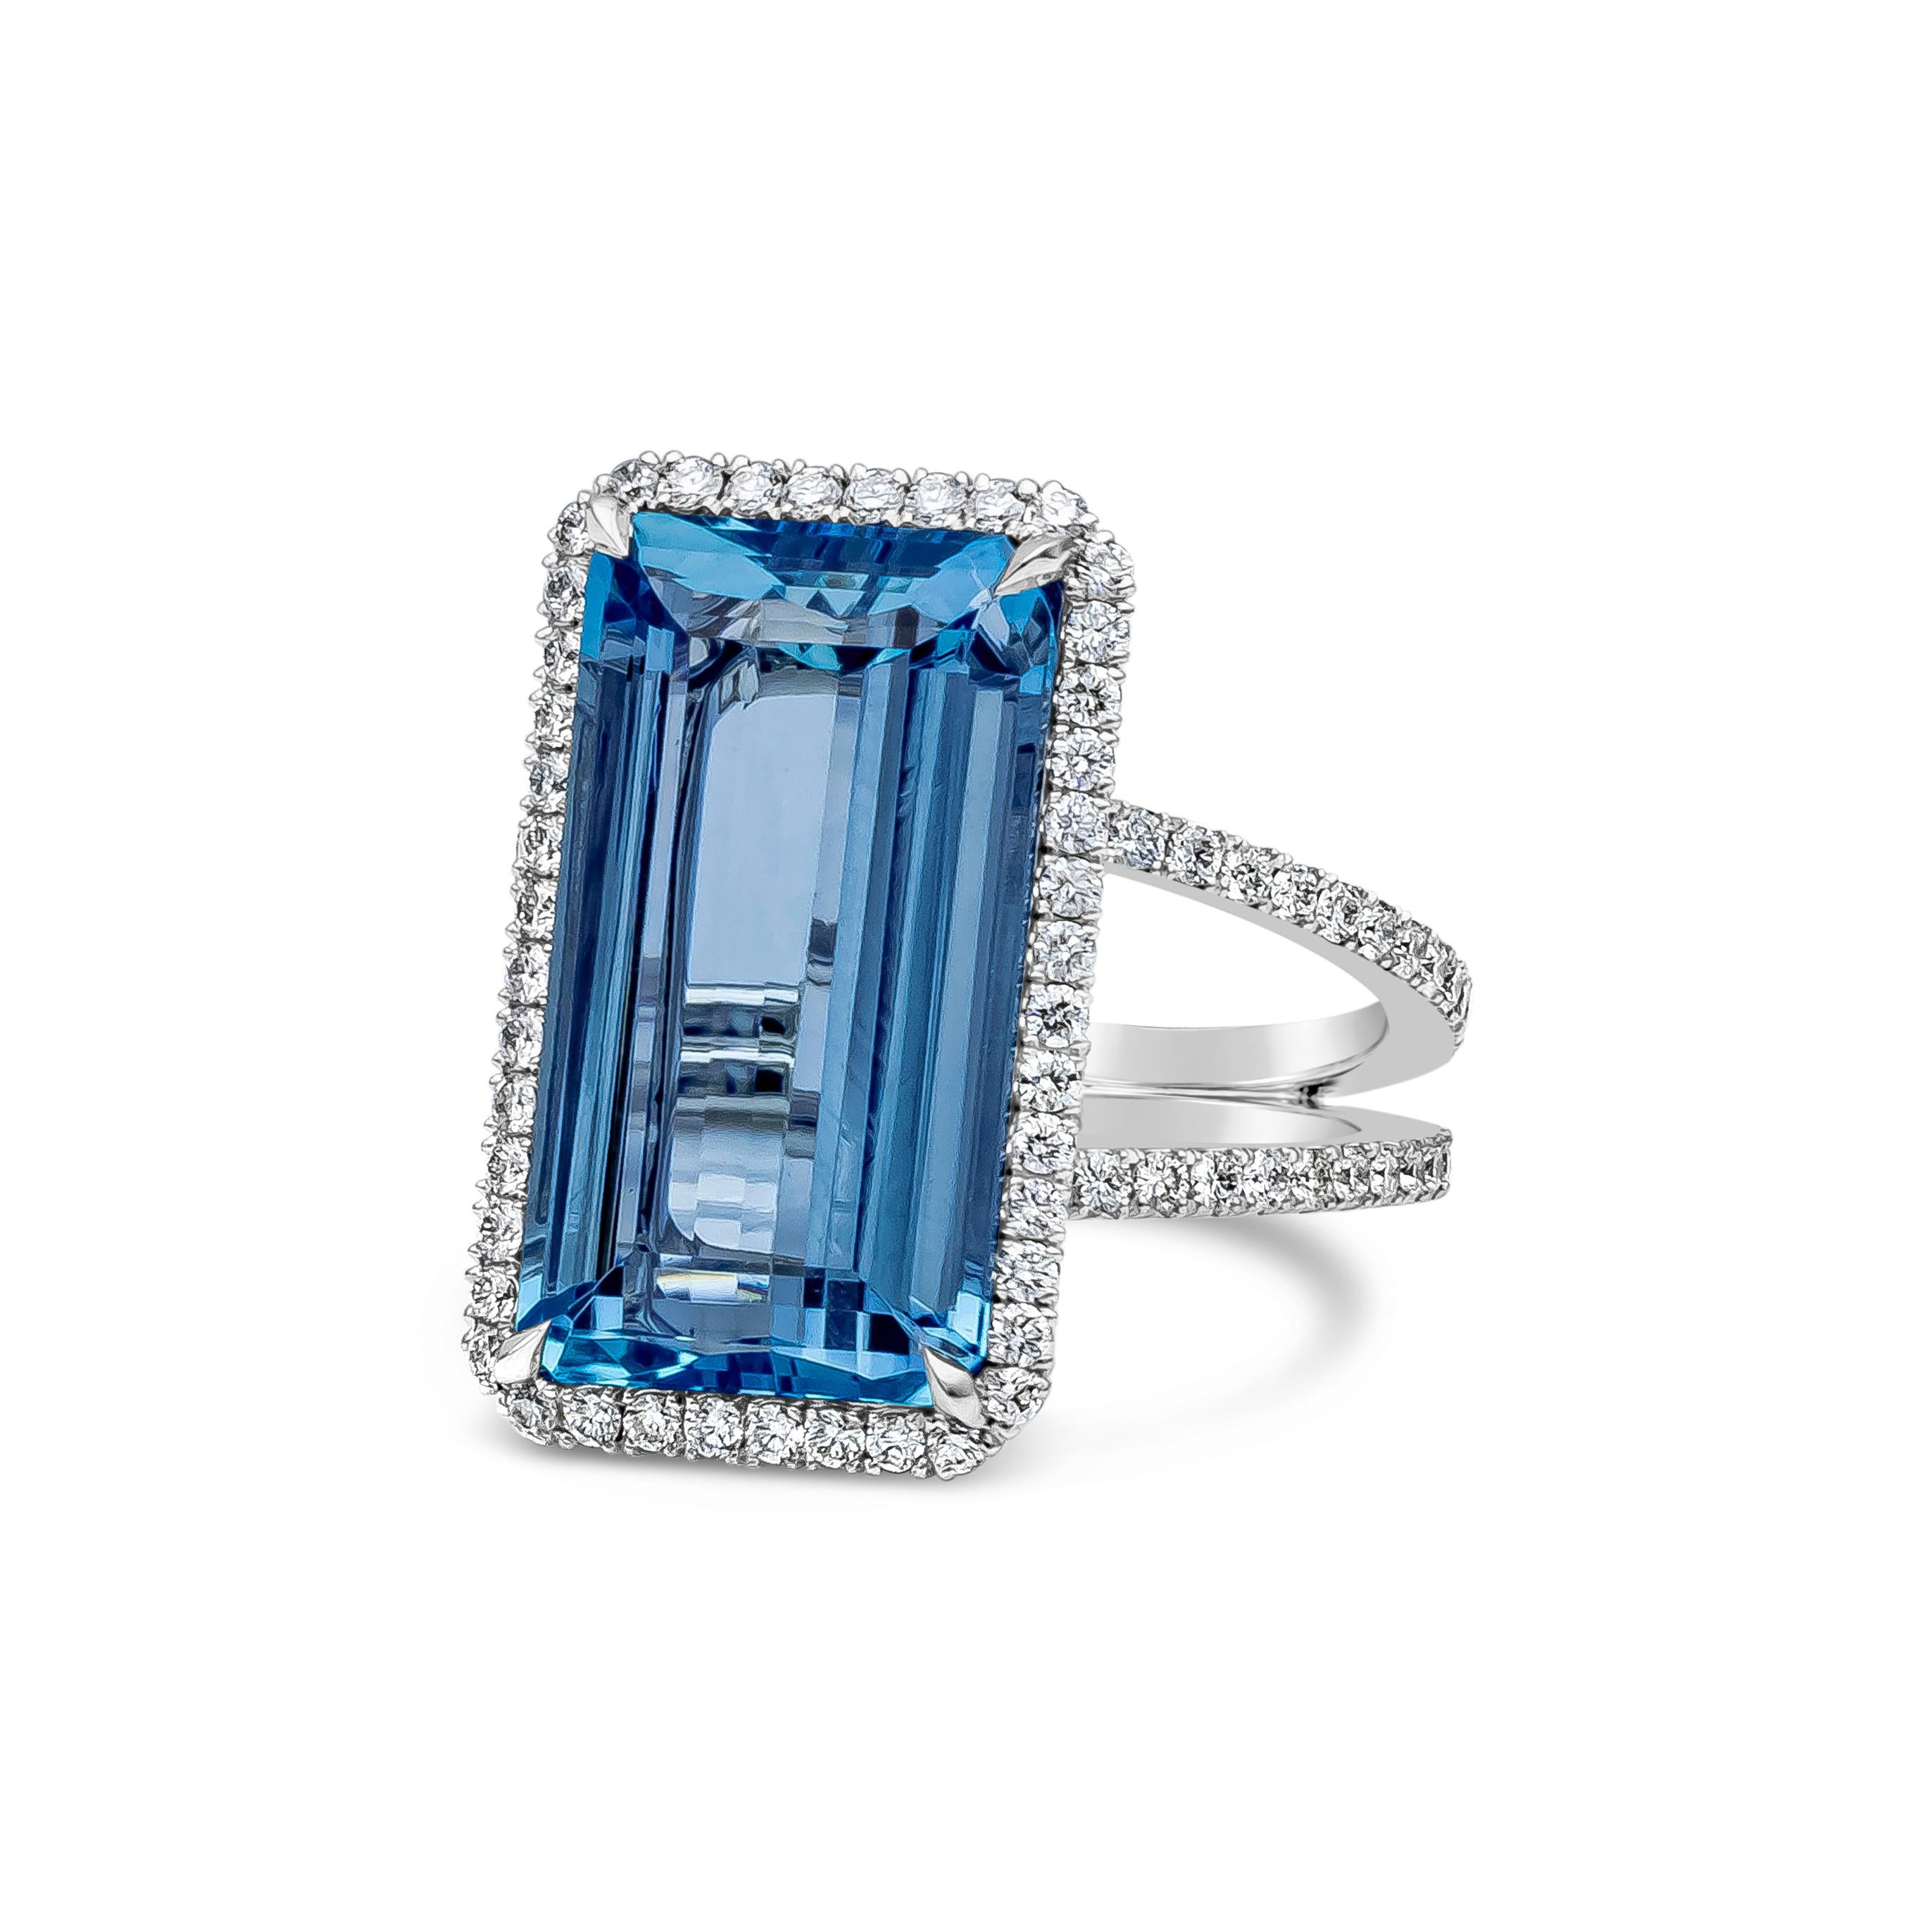 A gorgeous gemstone fashion ring featuring 9.17 carat emerald cut aquamarine gemstone, surrounded by 138 round brilliant diamonds that weigh 0.96 carats in total, F-G color and VS in clarity. This ring is set in a split shank diamond encrusted band